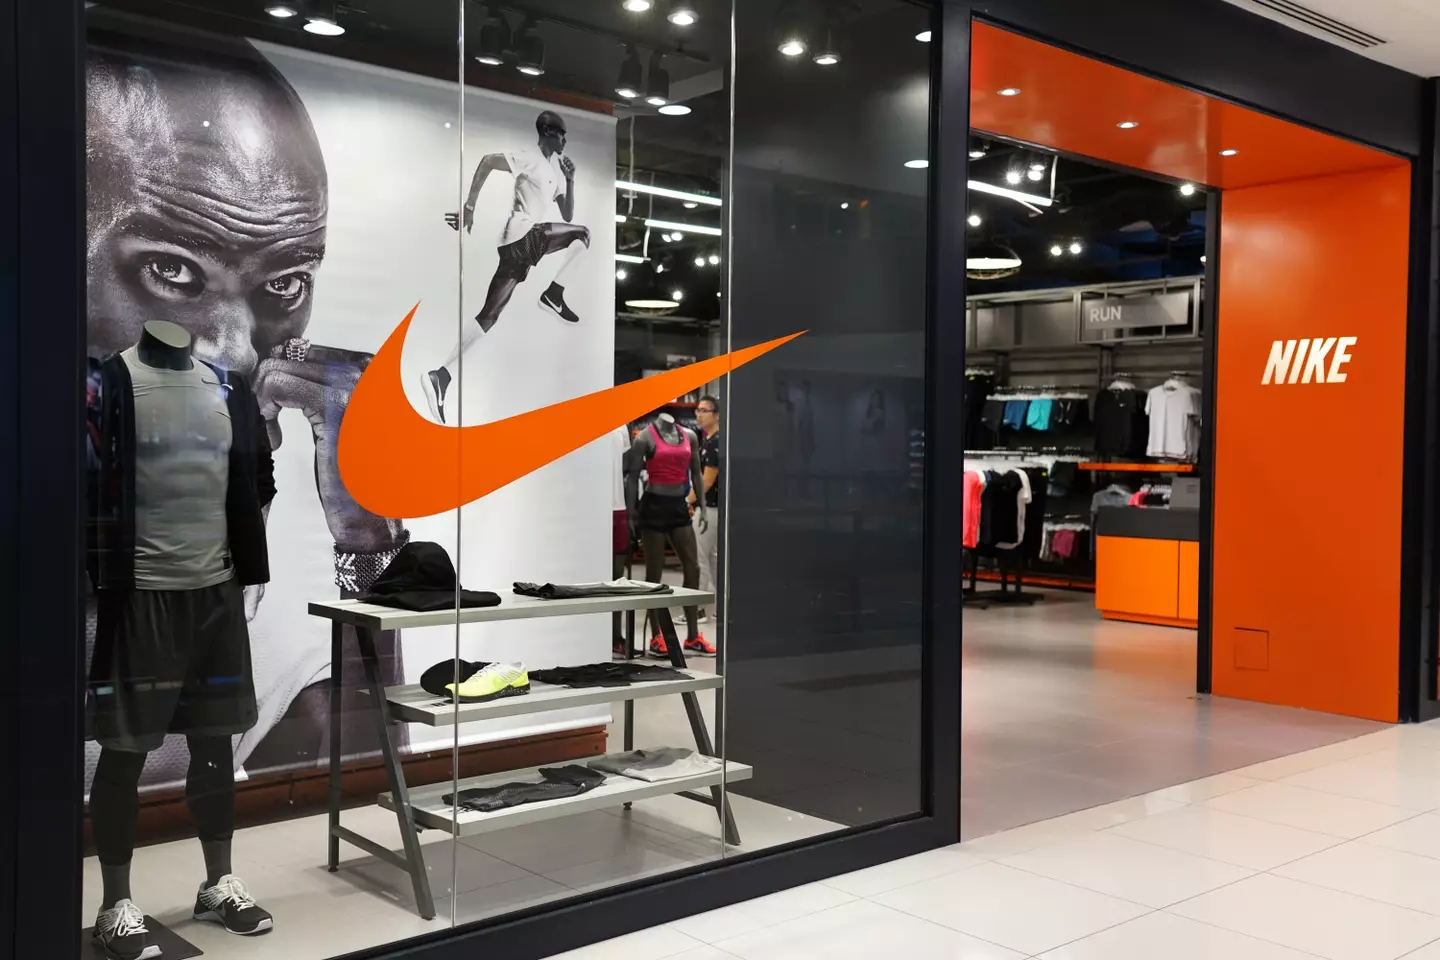 Nike is offering staff a week's paid leave (